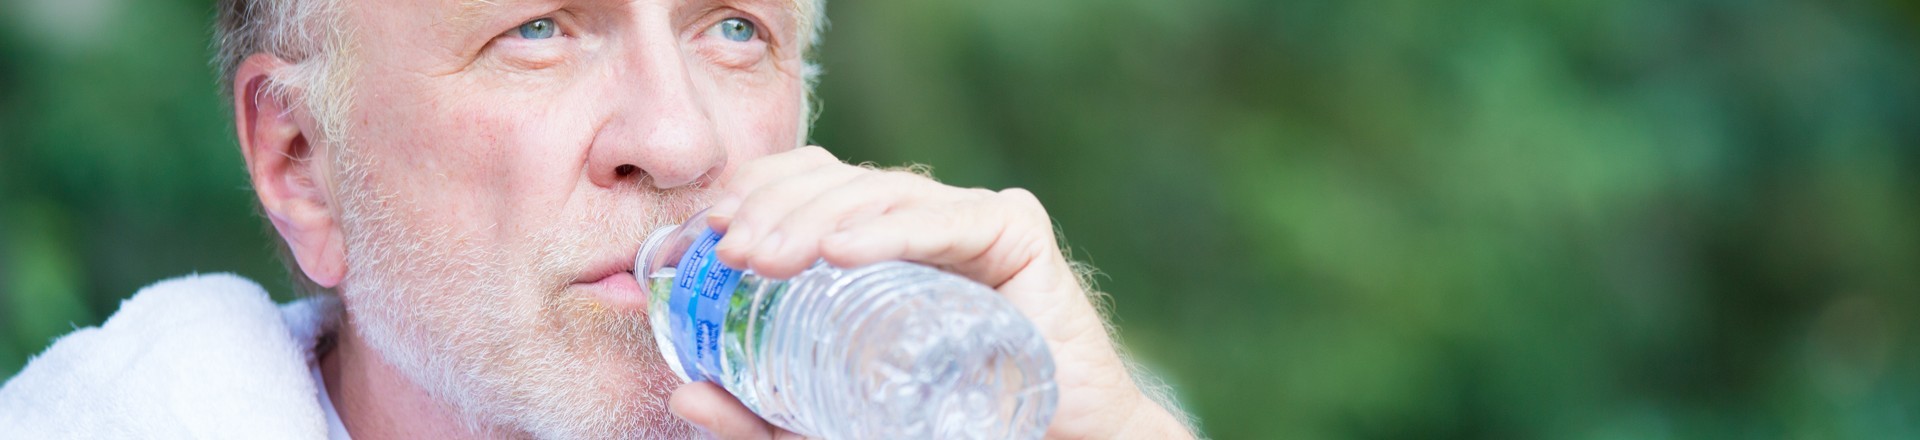 man drinking from water bottle after exercising outdoors